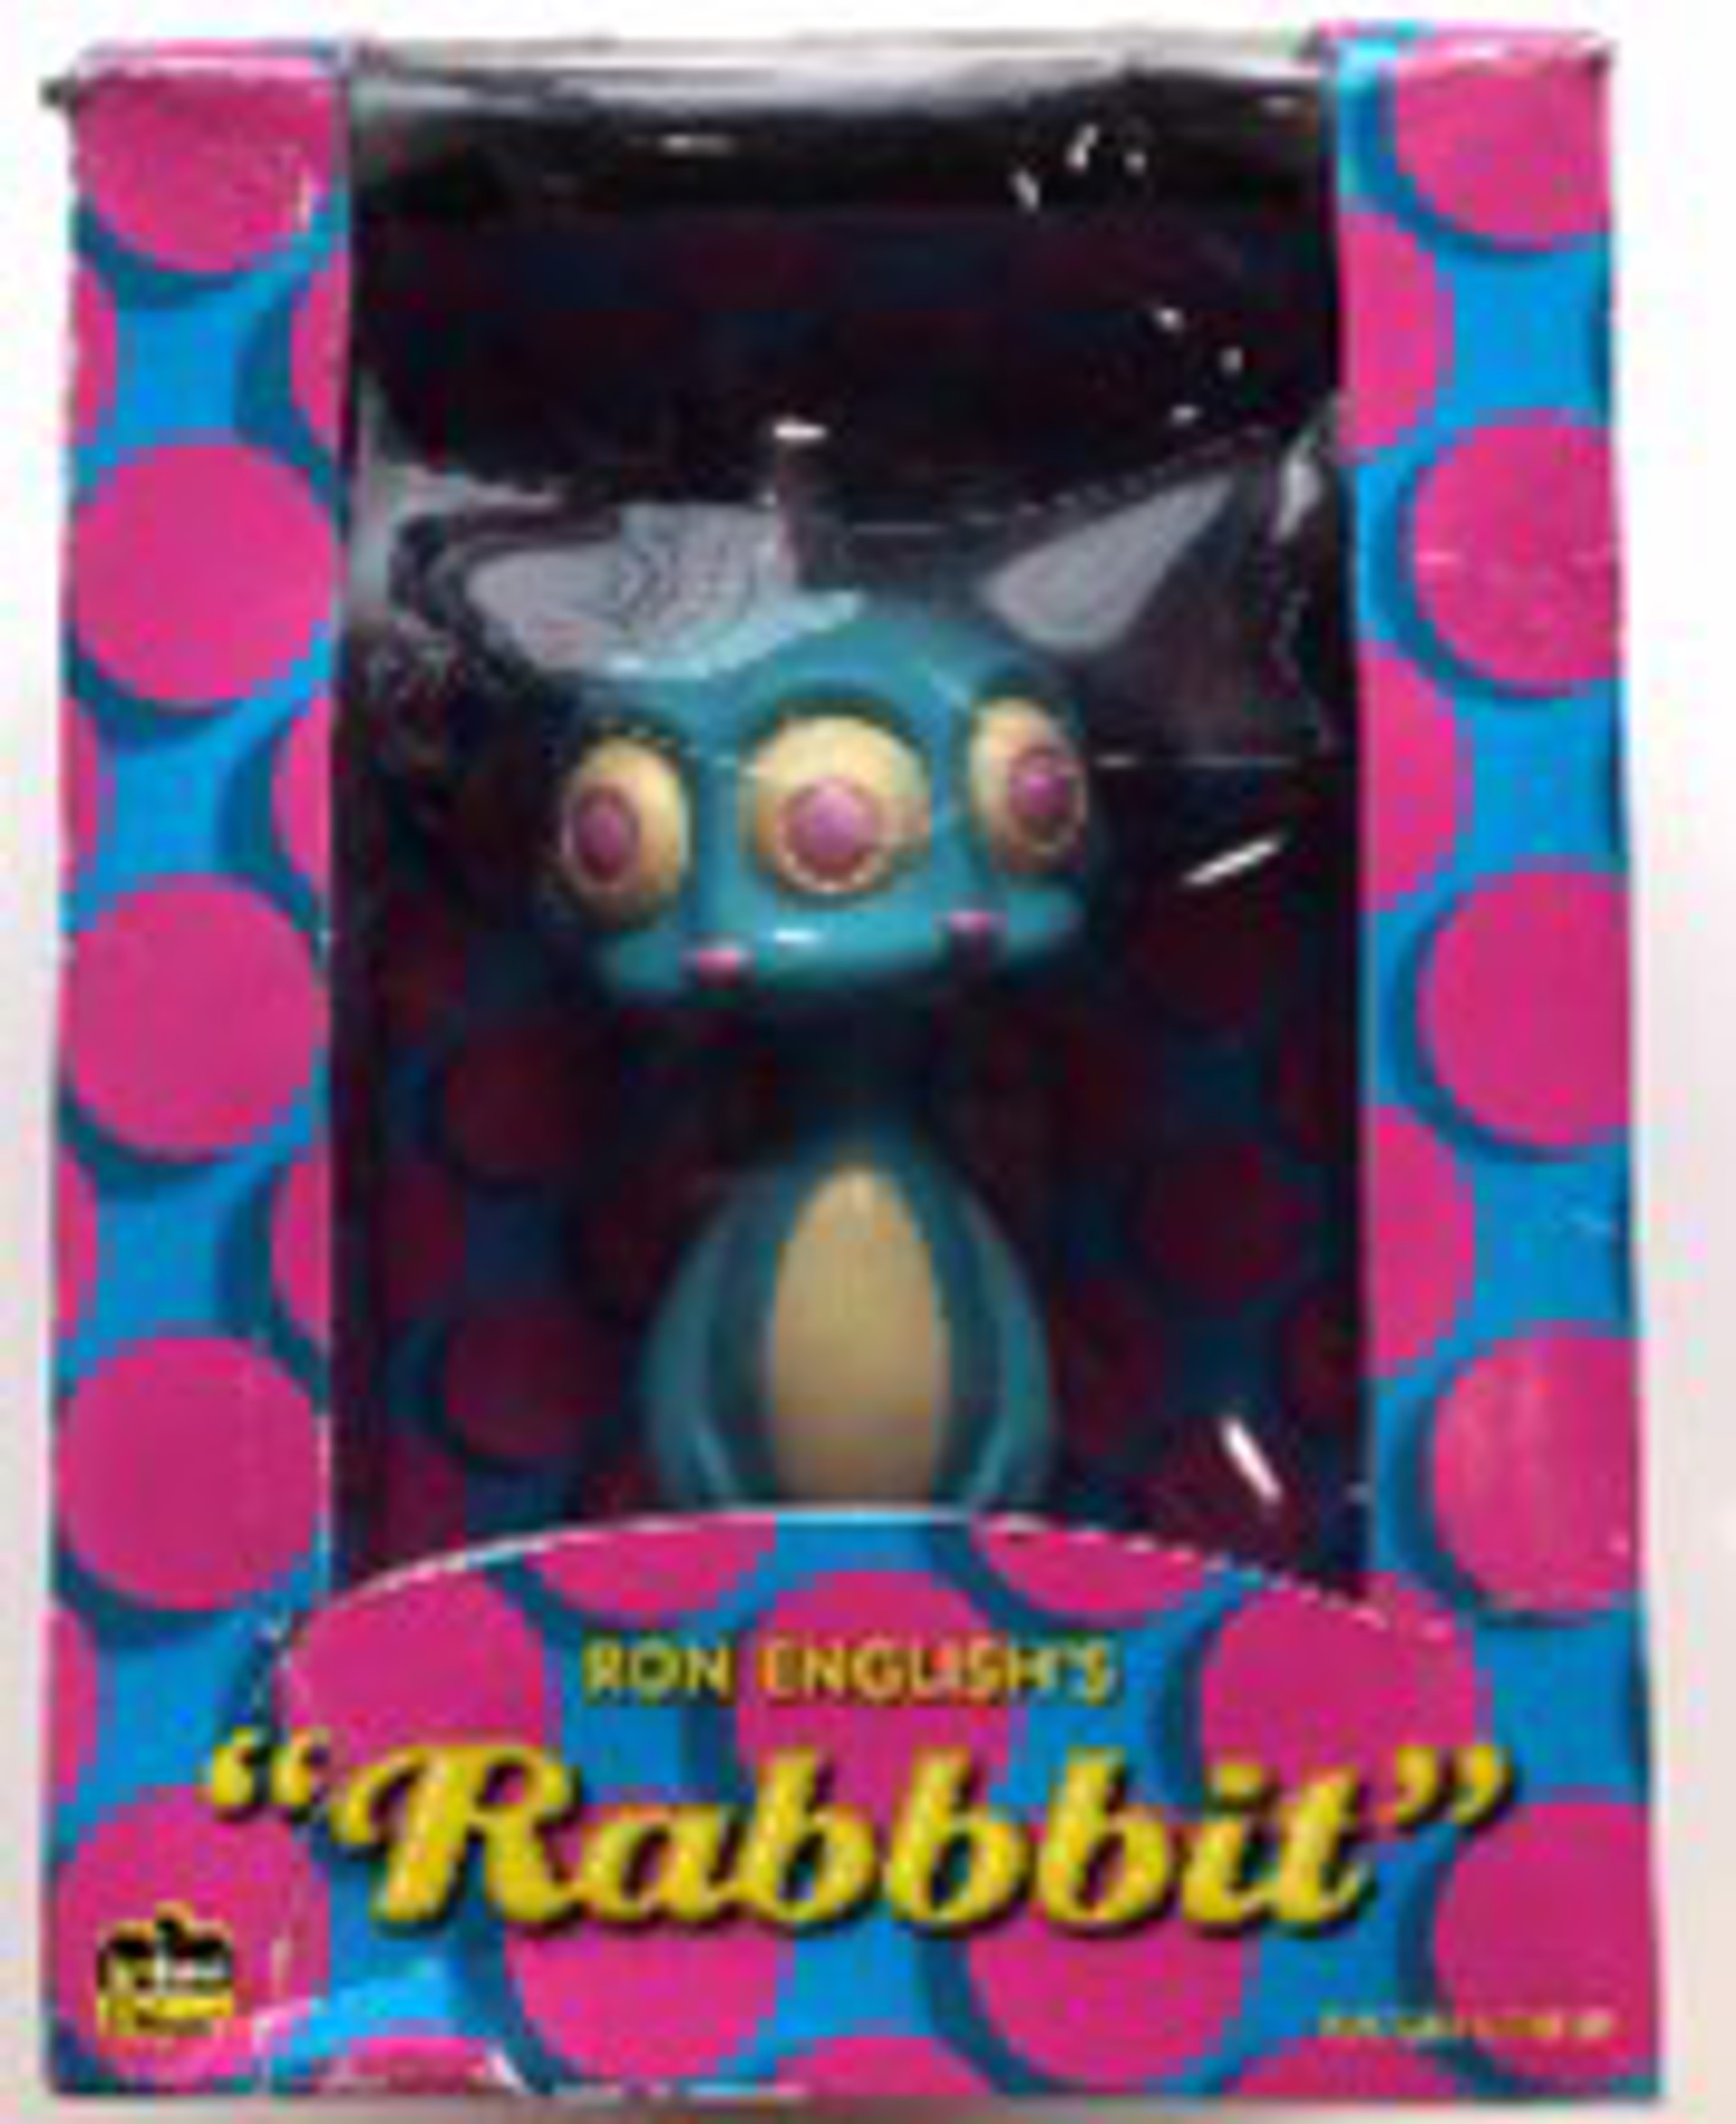 Rabbit (in box) by Ron English